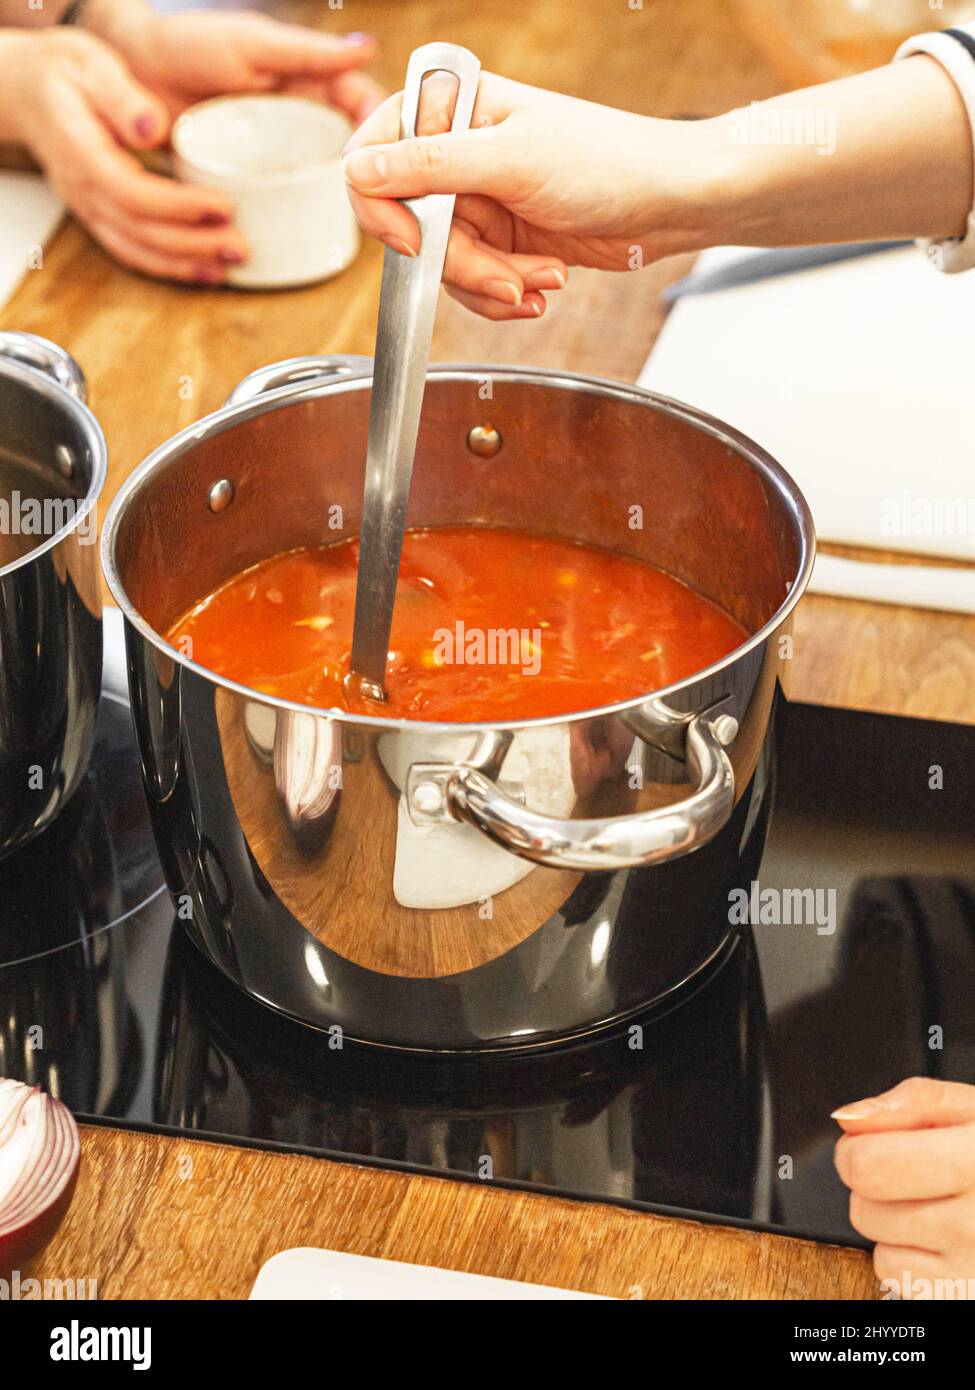 Uncertain woman preparing soup in the kitchen at home. A woman stirs tomato soup in a saucepan on the stove with a spoon. Stock Photo